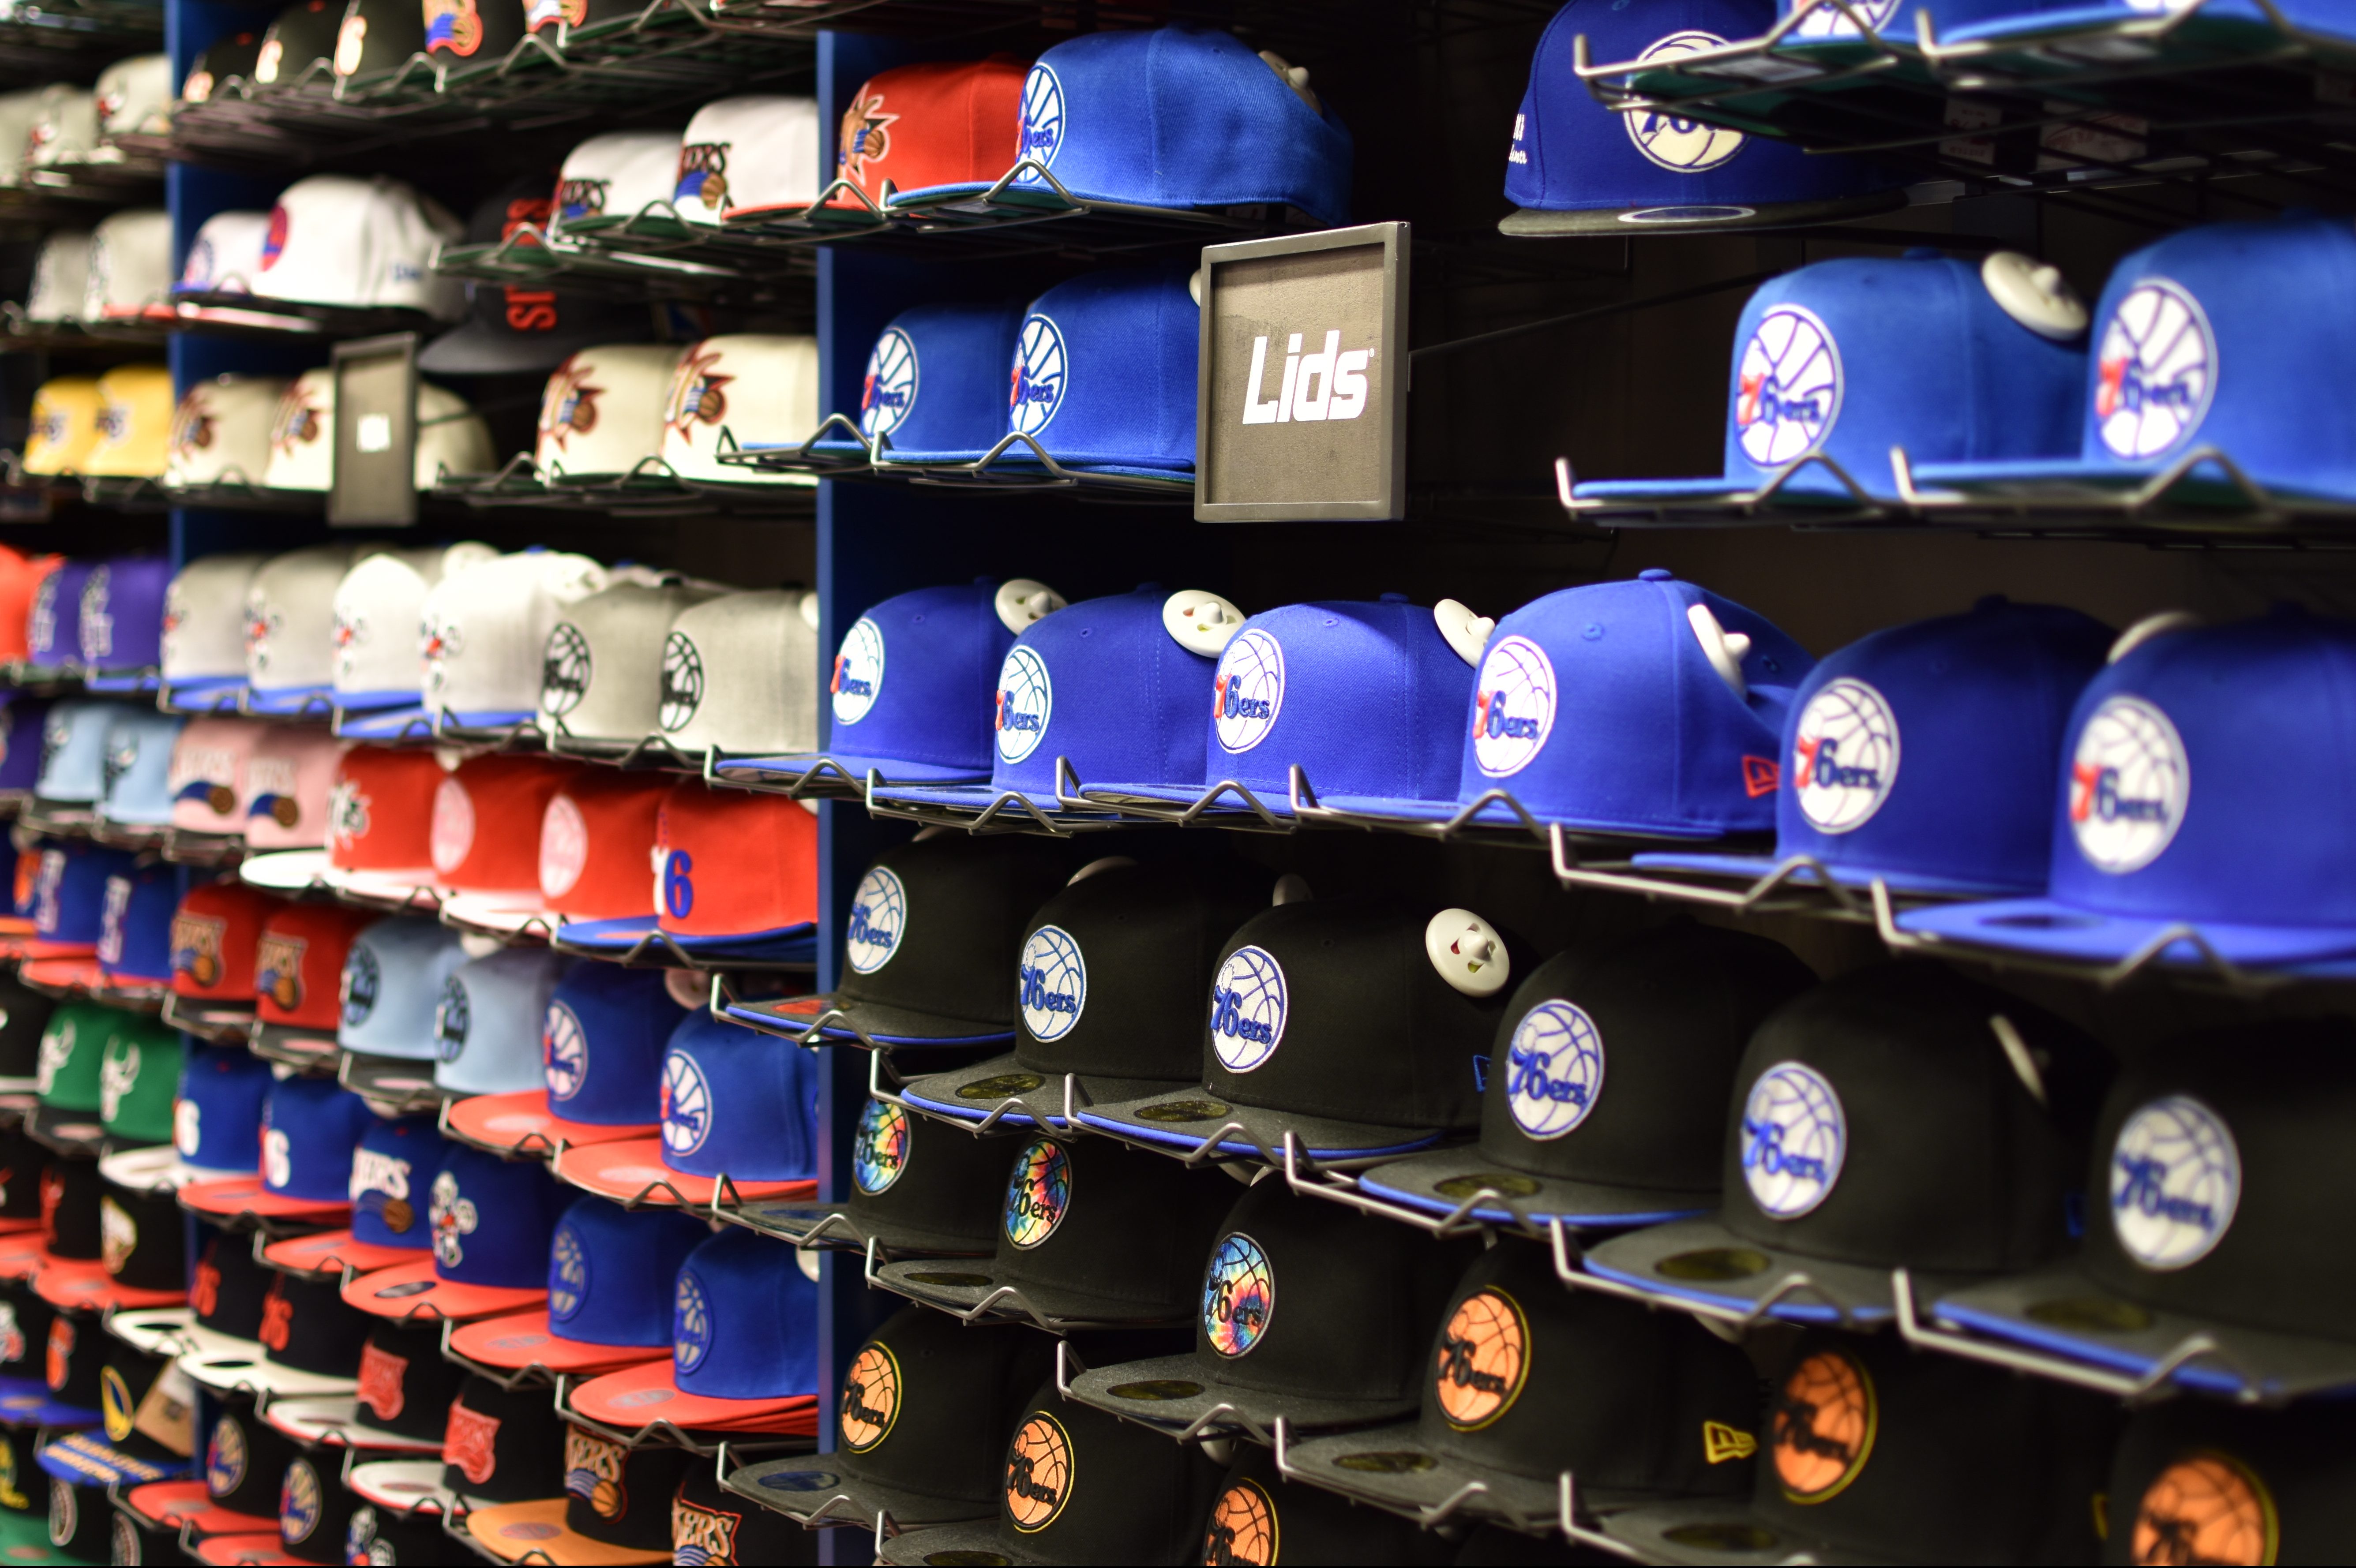 Lids is home to hats